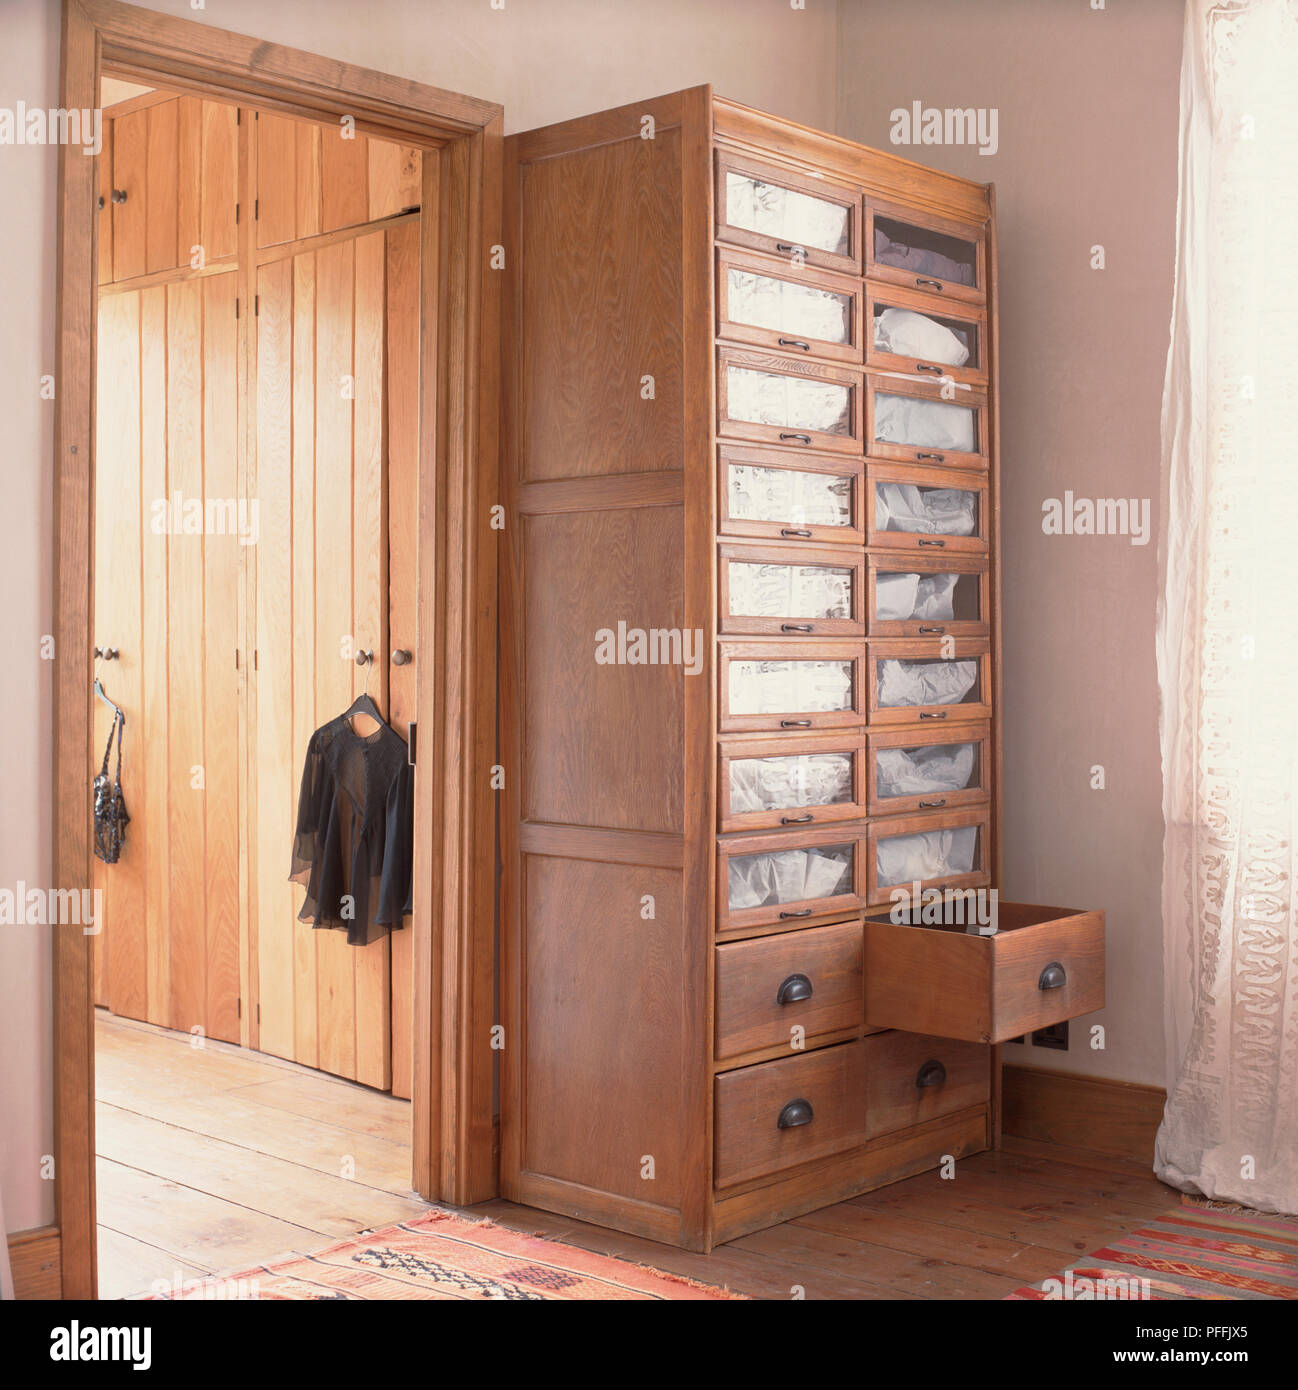 Cupboard-like wooden shelving unit, large drawers at bottom, small glass-fronted drawers reaching to top, white material behind glass windows, wooden-floored room with large wooden wardrobes through doorway. Stock Photo